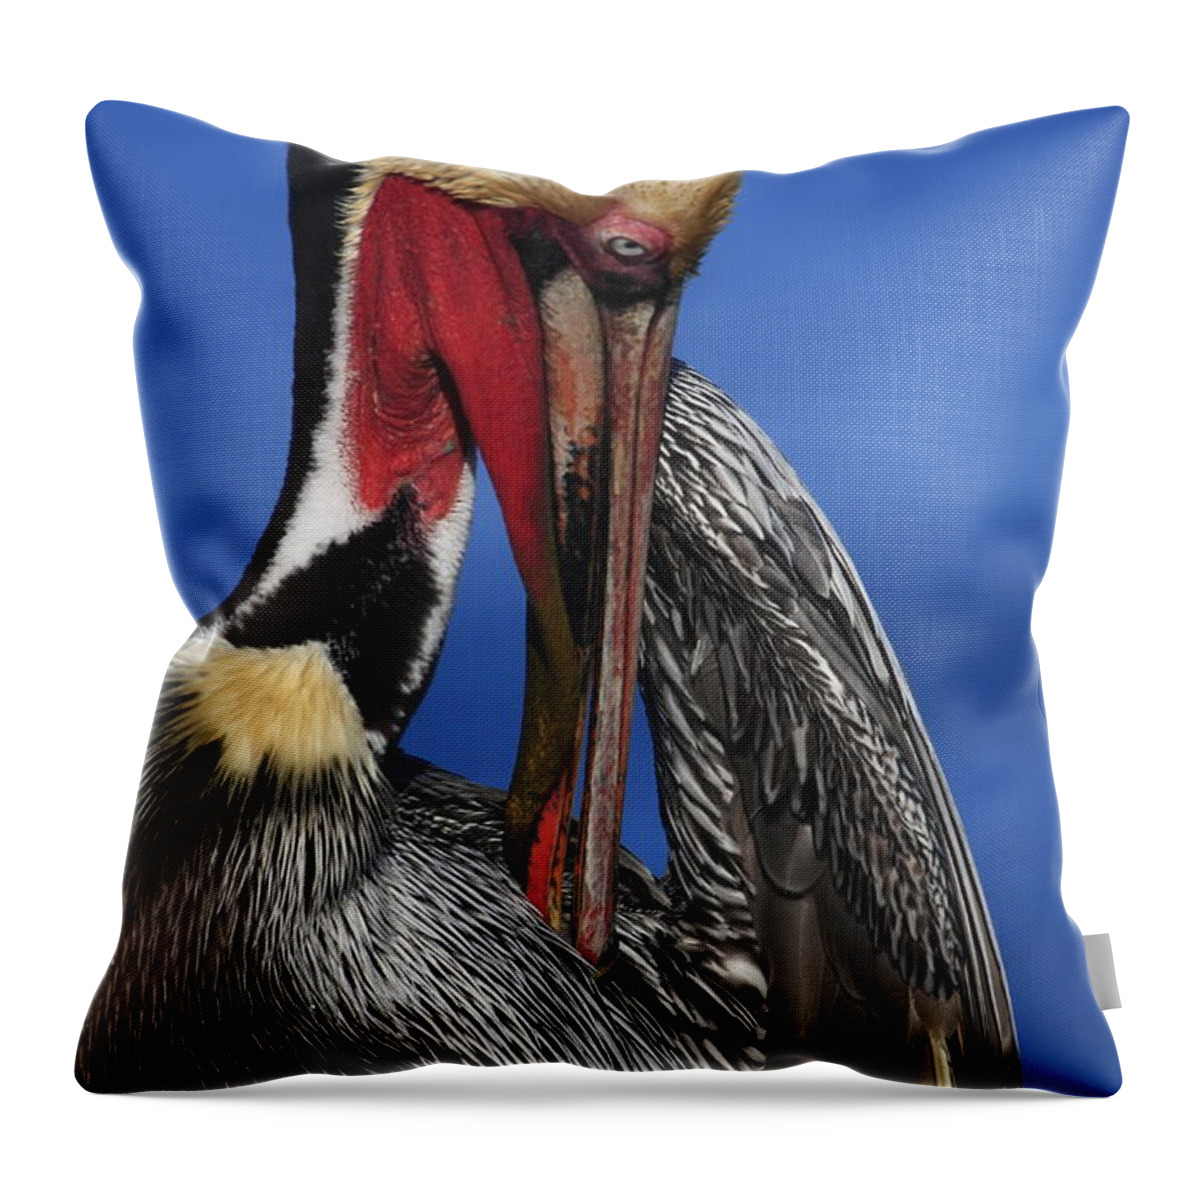 Pelicans Throw Pillow featuring the photograph Pelican In Breeding Colors by John F Tsumas